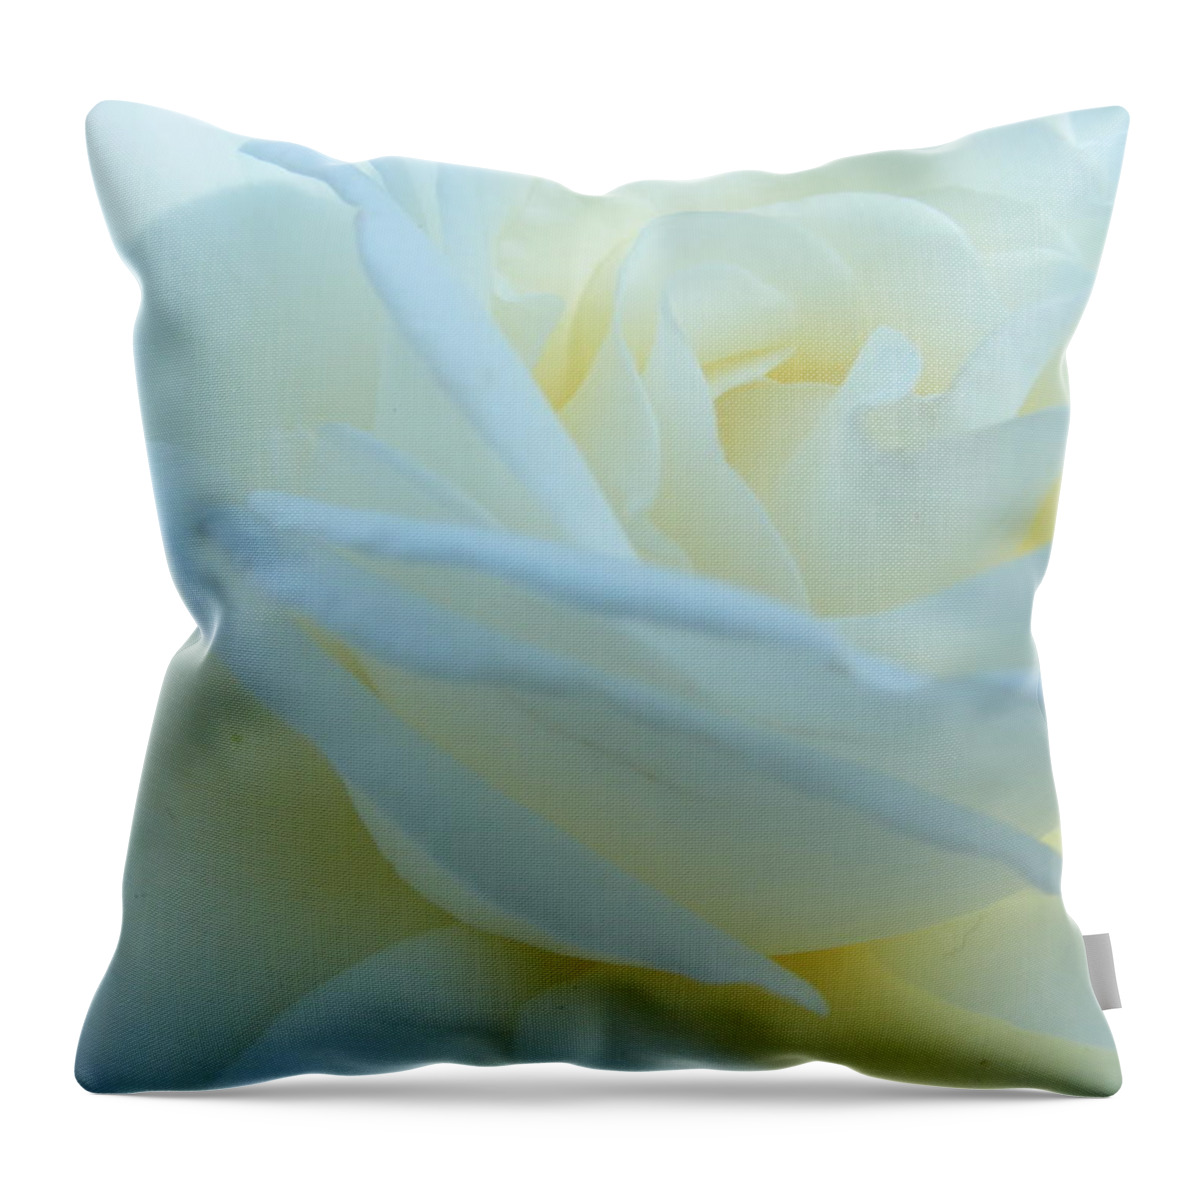 White Throw Pillow featuring the photograph White Rose by Michelle Hoffmann